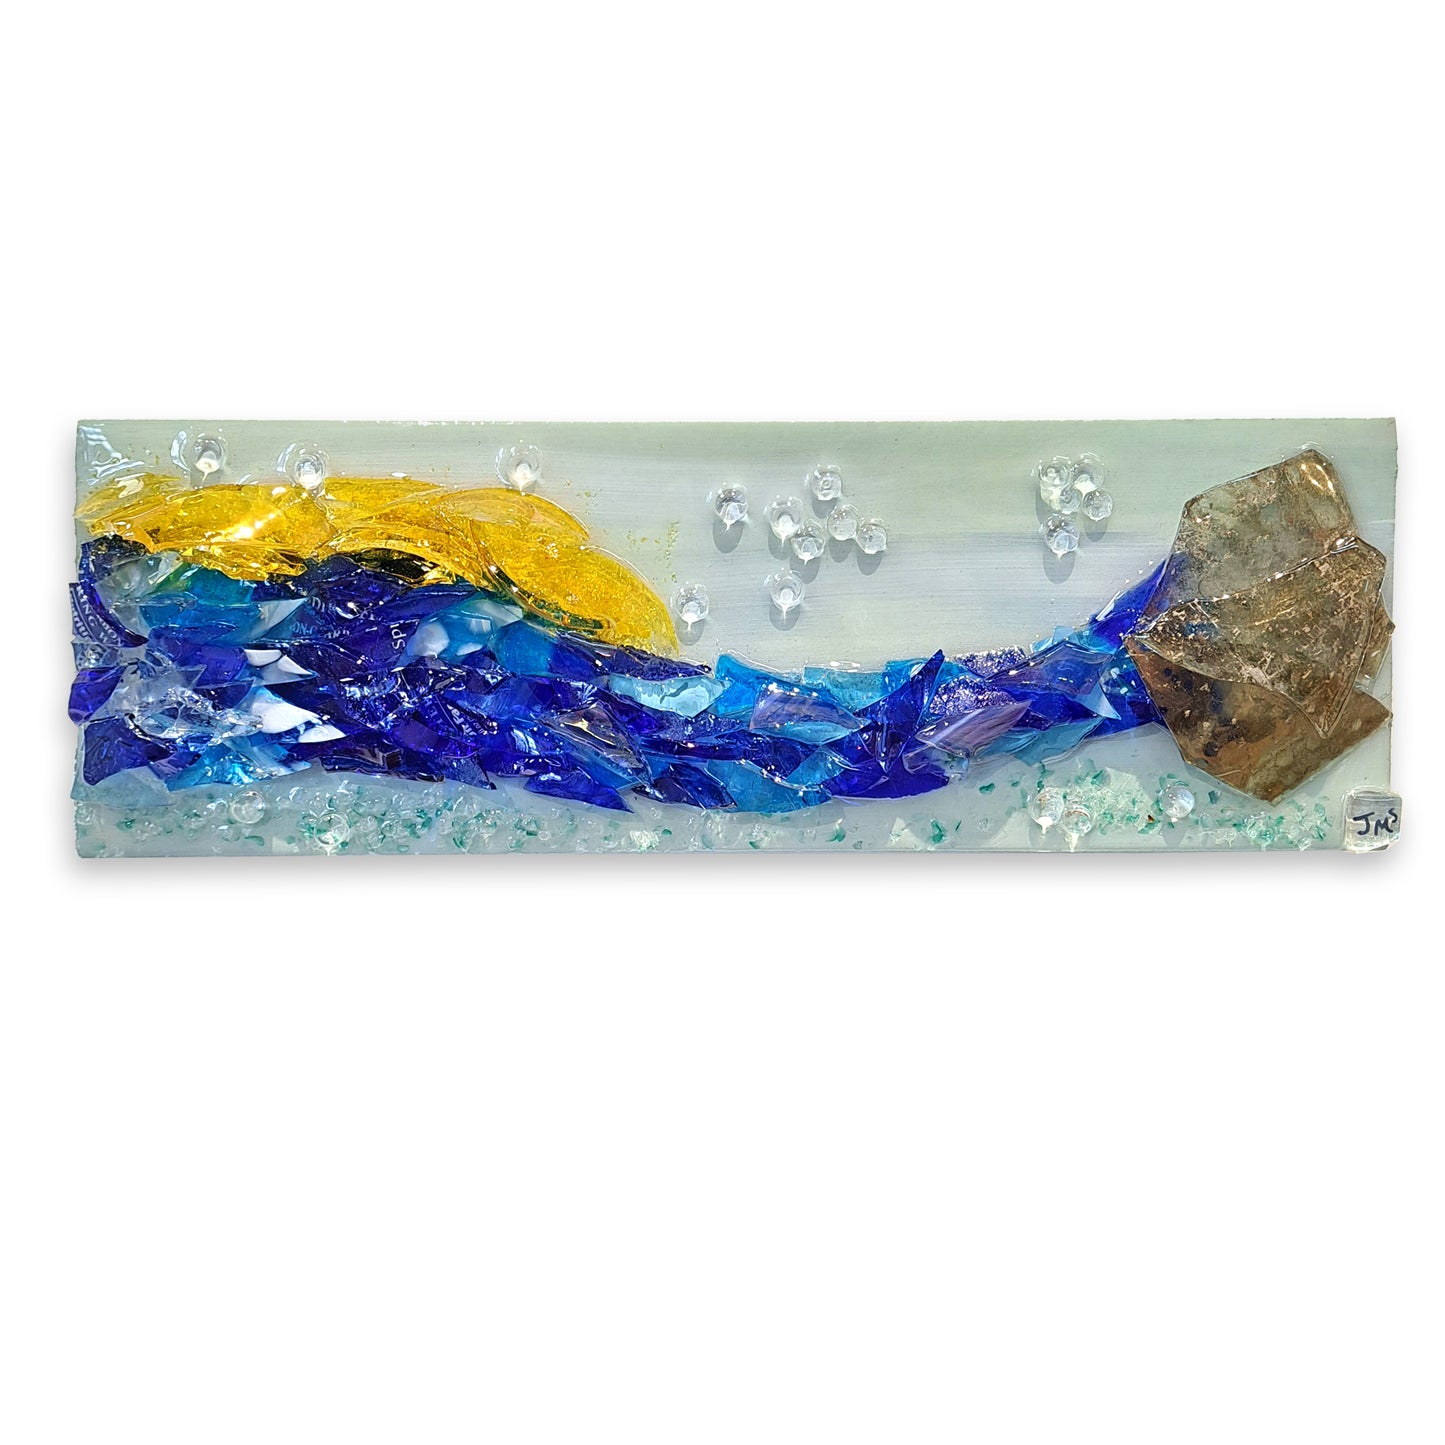 Small Glass Collage-Mermaid Tail